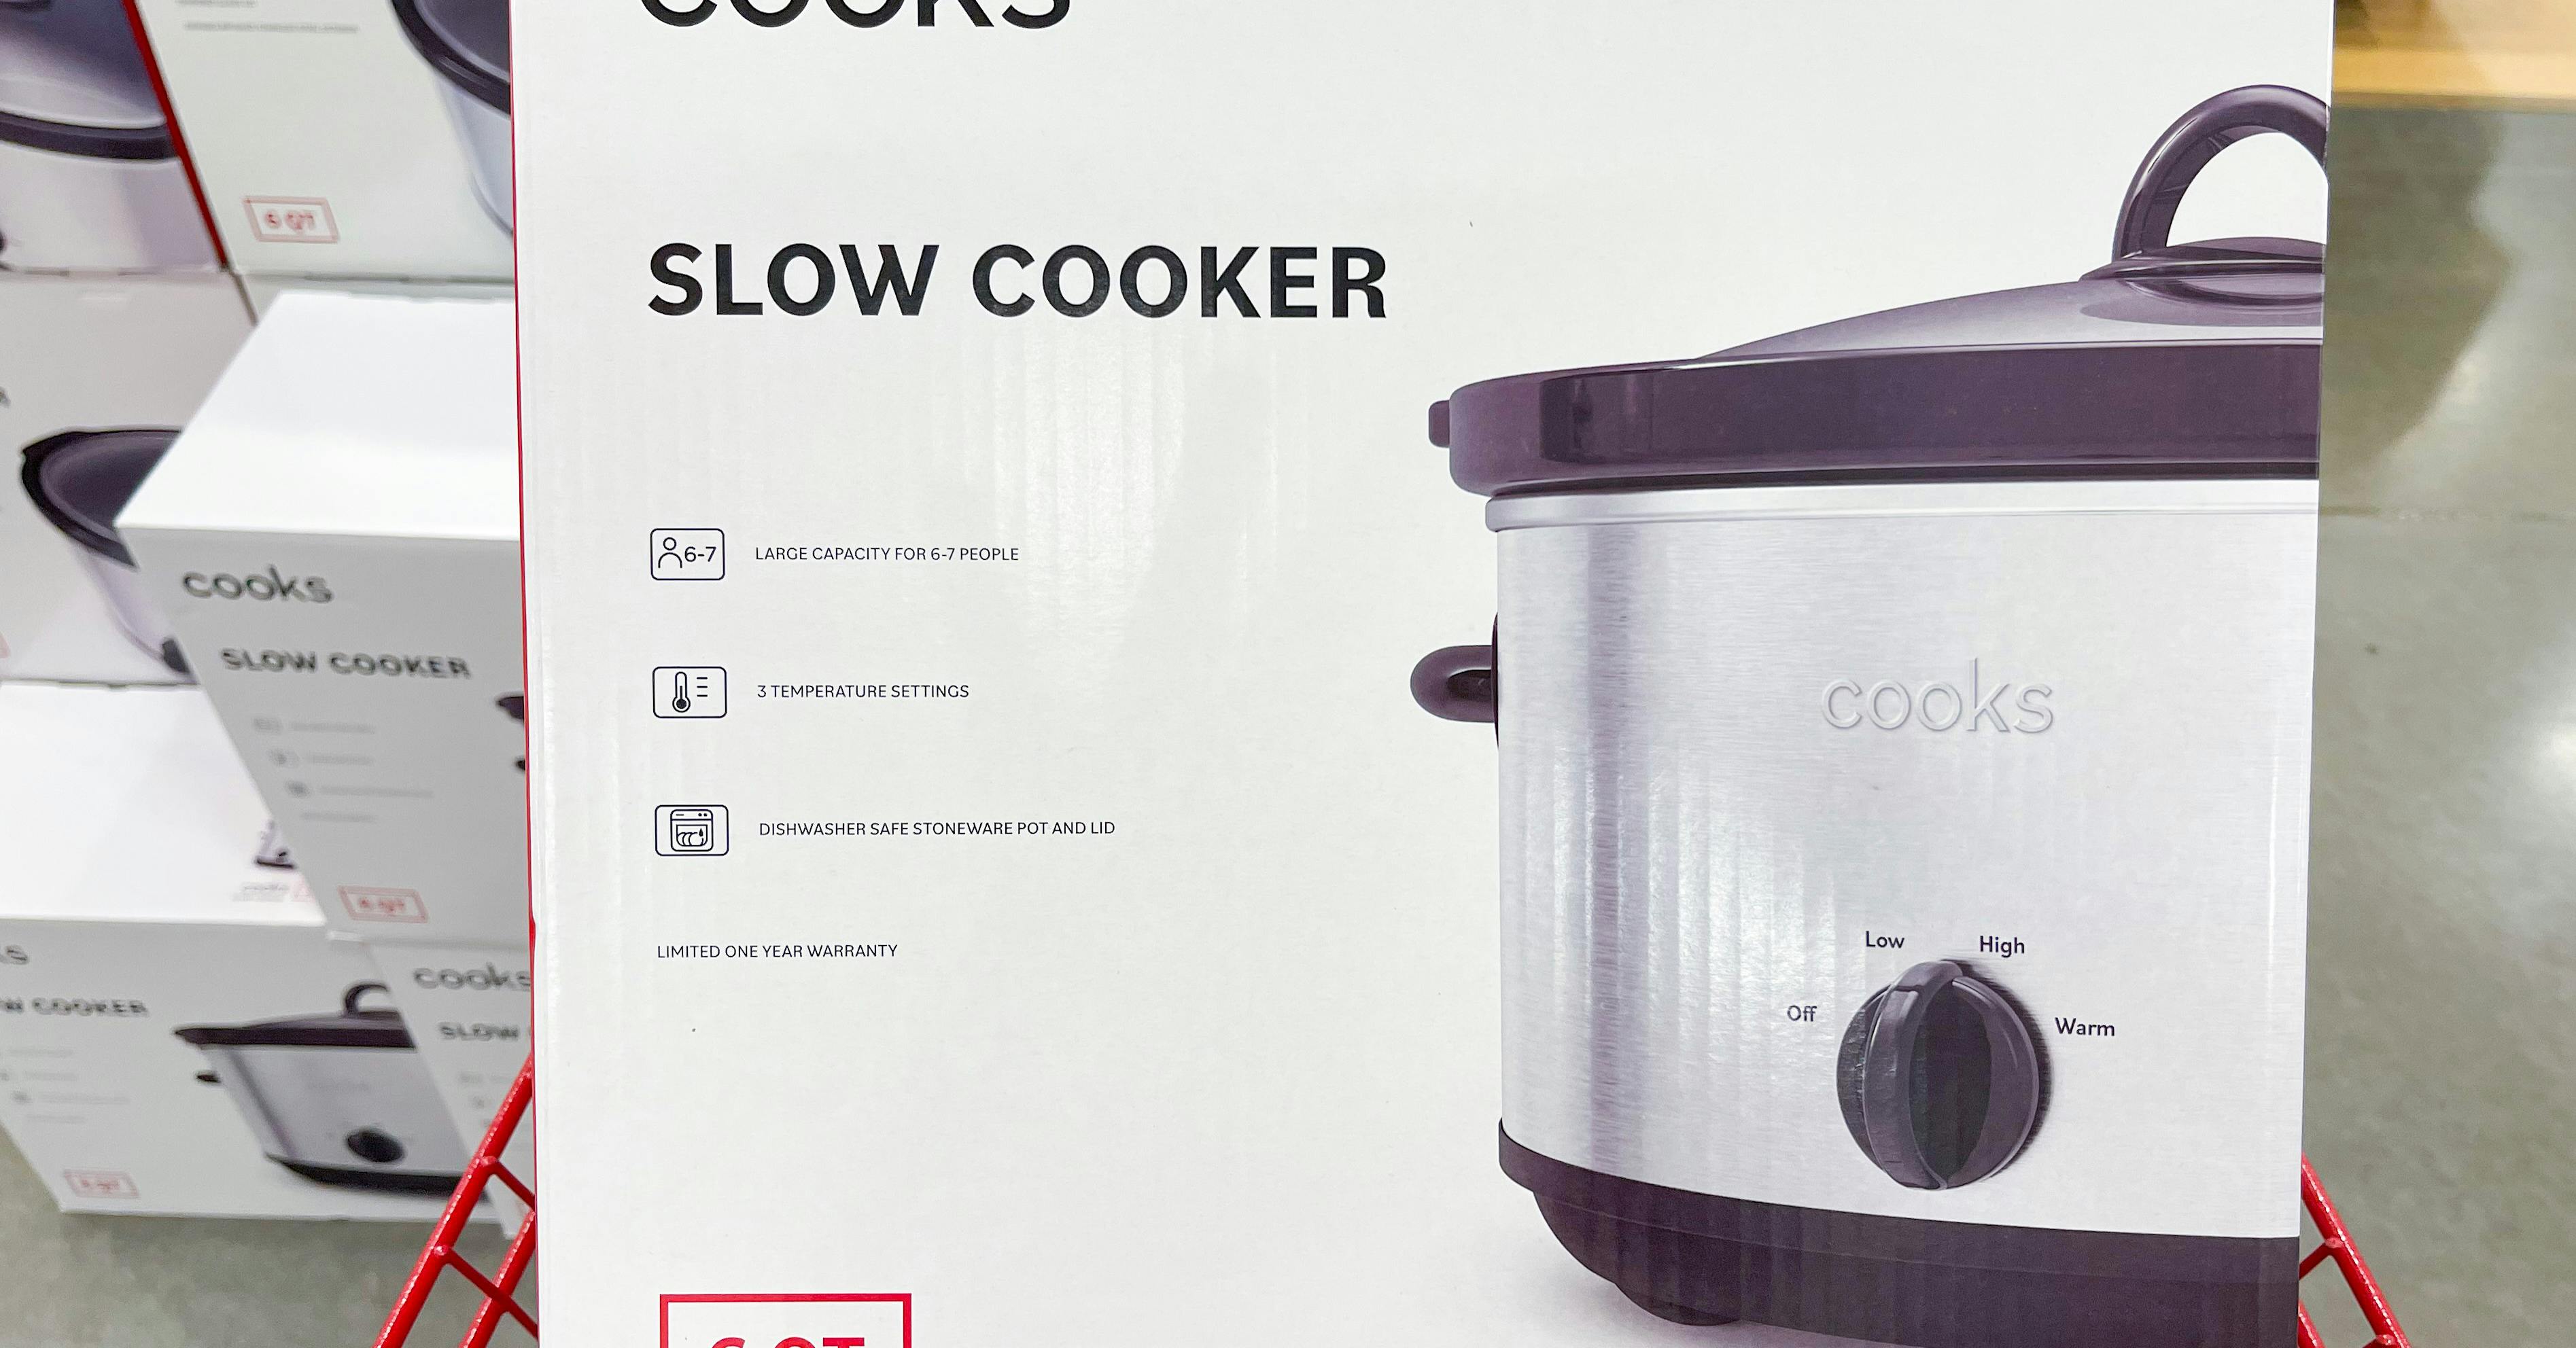 electric-kettle-or-slow-cooker-only-22-49-at-jcpenney-the-krazy